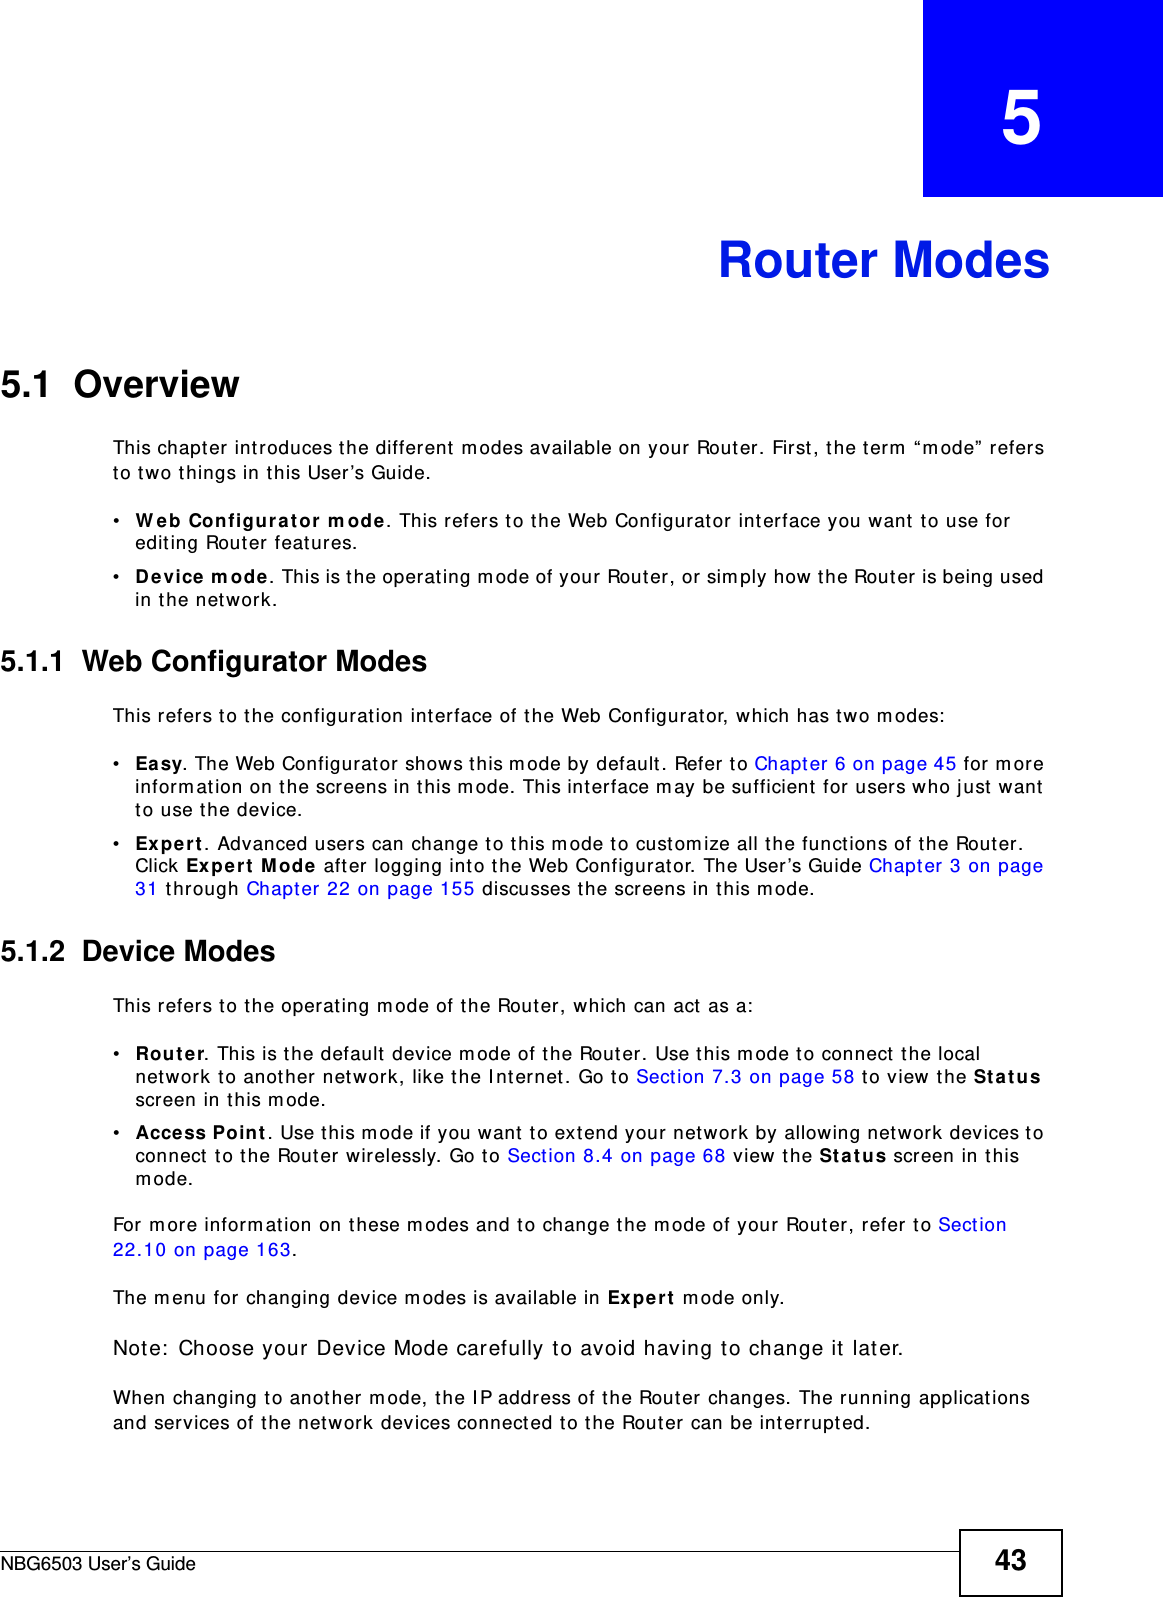 NBG6503 User’s Guide 43CHAPTER   5Router Modes5.1  OverviewThis chapter introduces the different modes available on your Router. First, the term “mode” refers to two things in this User’s Guide.•Web Configurator mode. This refers to the Web Configurator interface you want to use for editing Router features. •Device mode. This is the operating mode of your Router, or simply how the Router is being used in the network. 5.1.1  Web Configurator ModesThis refers to the configuration interface of the Web Configurator, which has two modes:•Easy. The Web Configurator shows this mode by default. Refer to Chapter 6 on page 45 for more information on the screens in this mode. This interface may be sufficient for users who just want to use the device.•Expert. Advanced users can change to this mode to customize all the functions of the Router. Click Expert Mode after logging into the Web Configurator. The User’s Guide Chapter 3 on page 31 through Chapter 22 on page 155 discusses the screens in this mode.5.1.2  Device ModesThis refers to the operating mode of the Router, which can act as a:•Router. This is the default device mode of the Router. Use this mode to connect the local network to another network, like the Internet. Go to Section 7.3 on page 58 to view the Status screen in this mode.•Access Point. Use this mode if you want to extend your network by allowing network devices to connect to the Router wirelessly. Go to Section 8.4 on page 68 view the Status screen in this mode.For more information on these modes and to change the mode of your Router, refer to Section 22.10 on page 163.The menu for changing device modes is available in Expert mode only. Note: Choose your Device Mode carefully to avoid having to change it later.When changing to another mode, the IP address of the Router changes. The running applications and services of the network devices connected to the Router can be interrupted. 